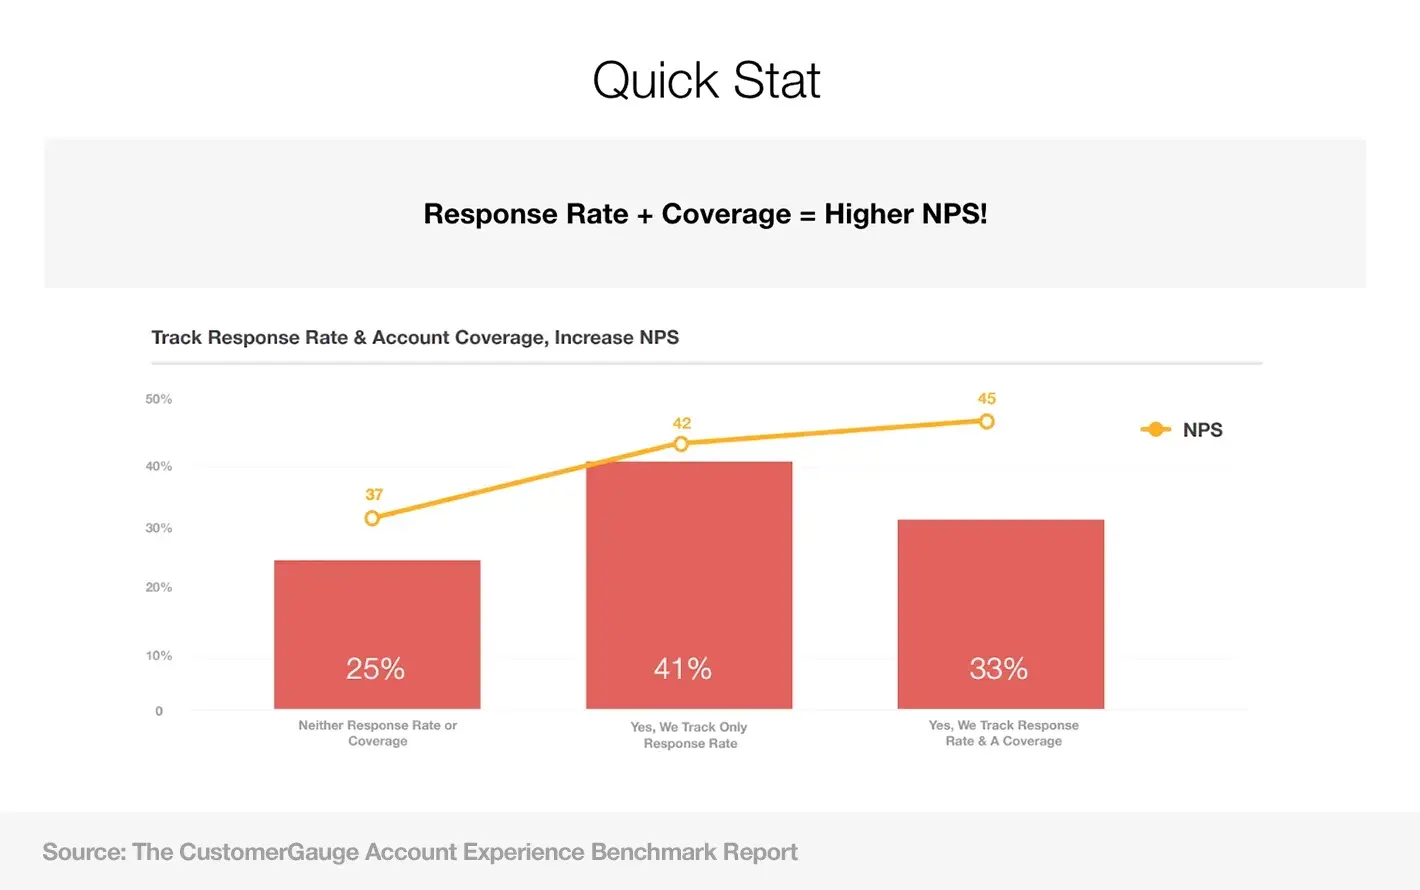 Higher Response Rate, Higher NPS